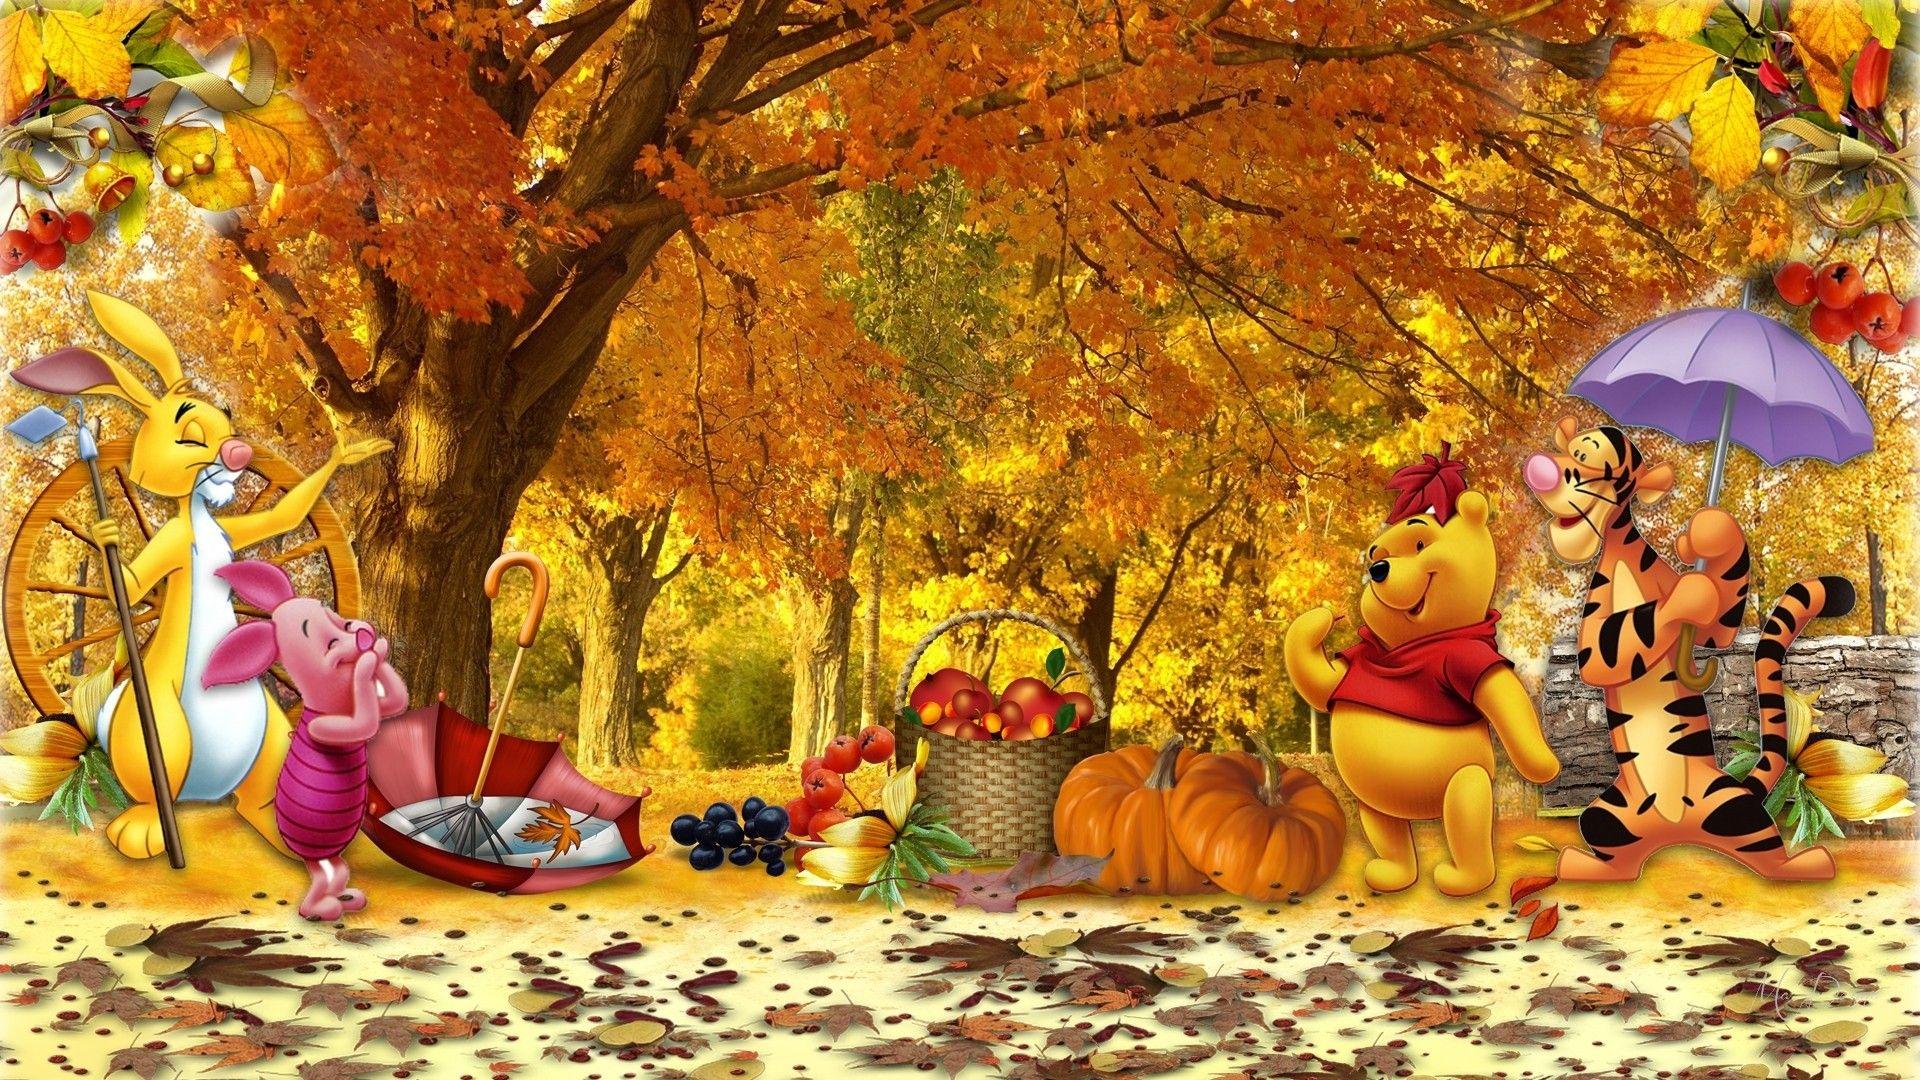 Winnie the Pooh Thanksgiving Wallpapers.